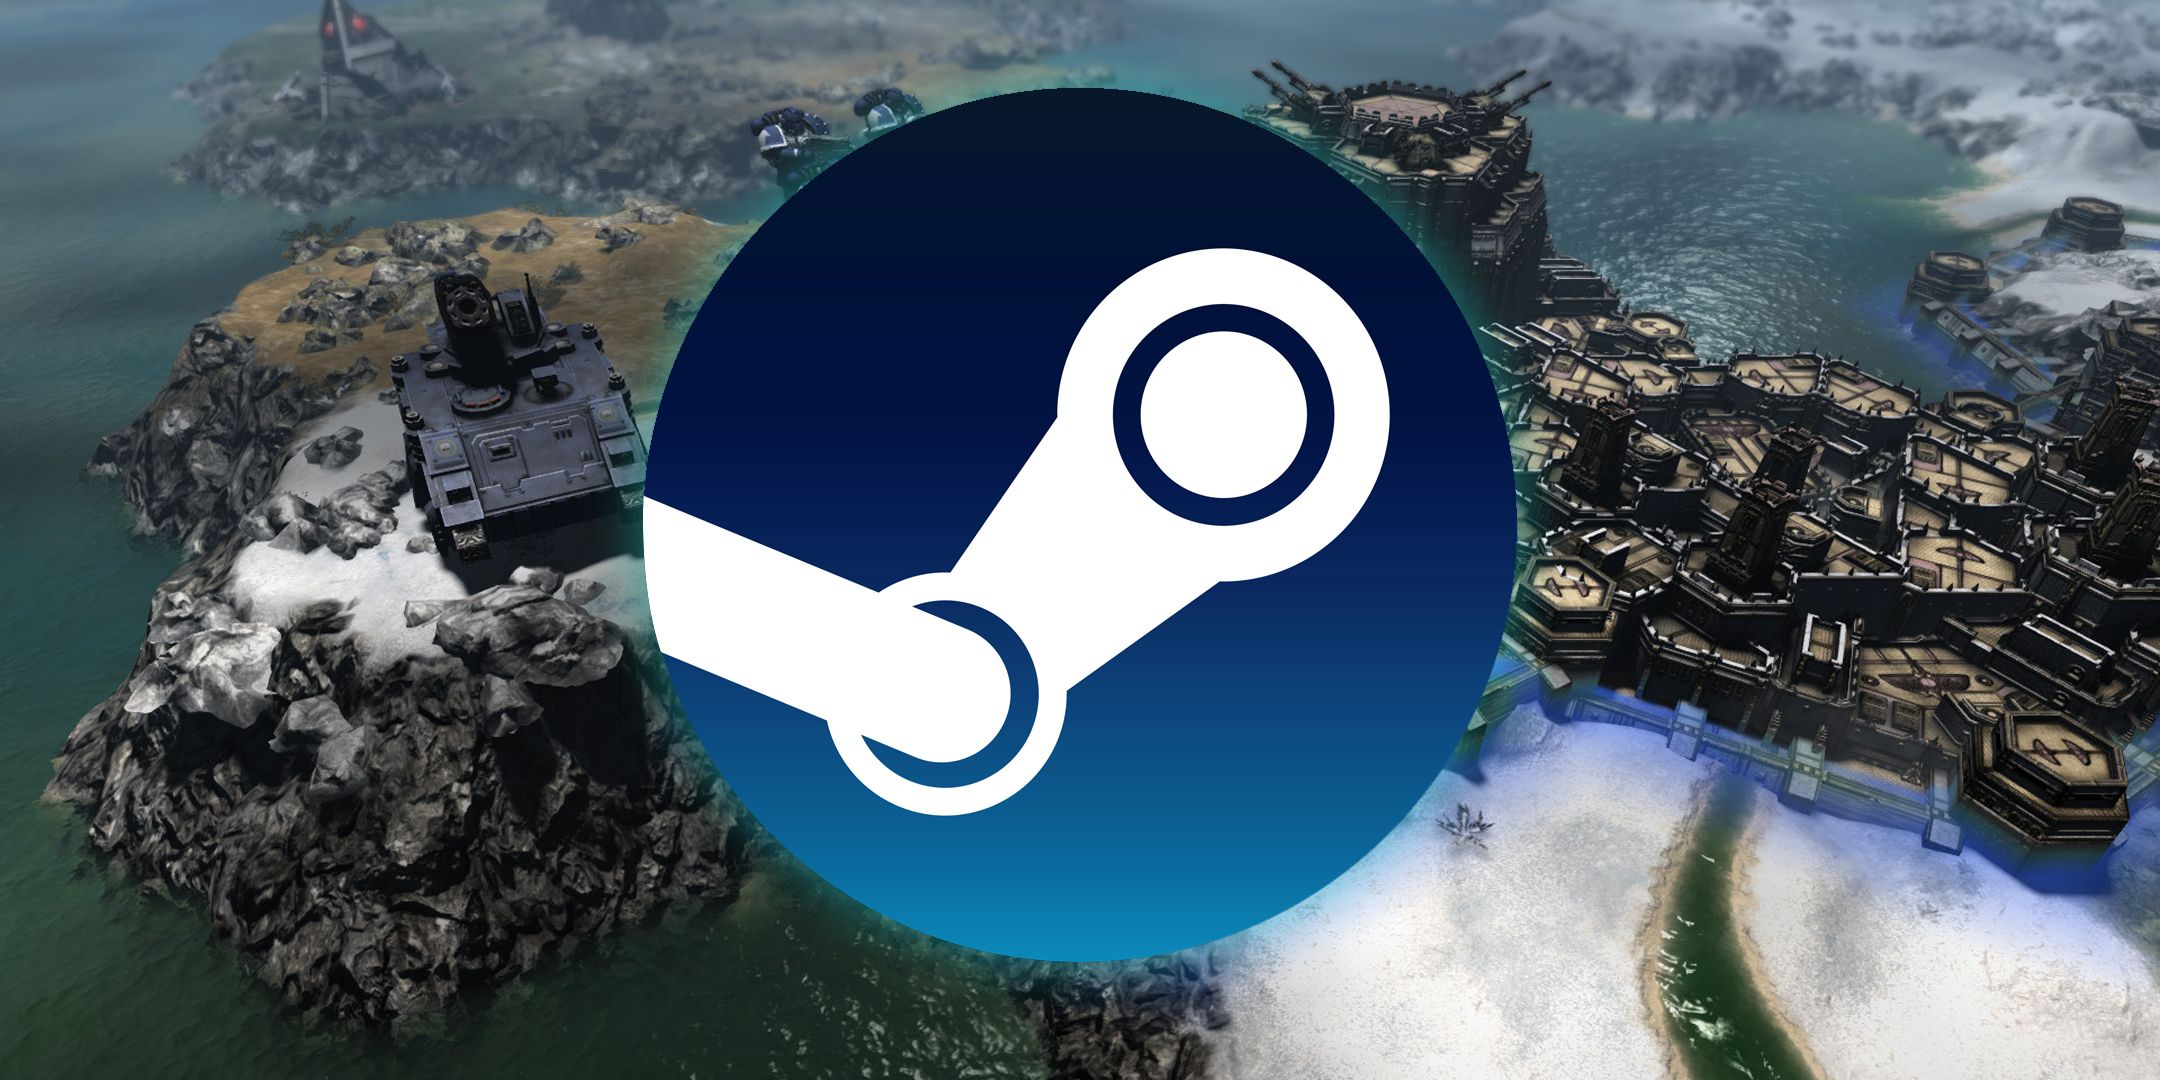 The Steam logo in front of gameplay from Warhammer 40K: Gladius.